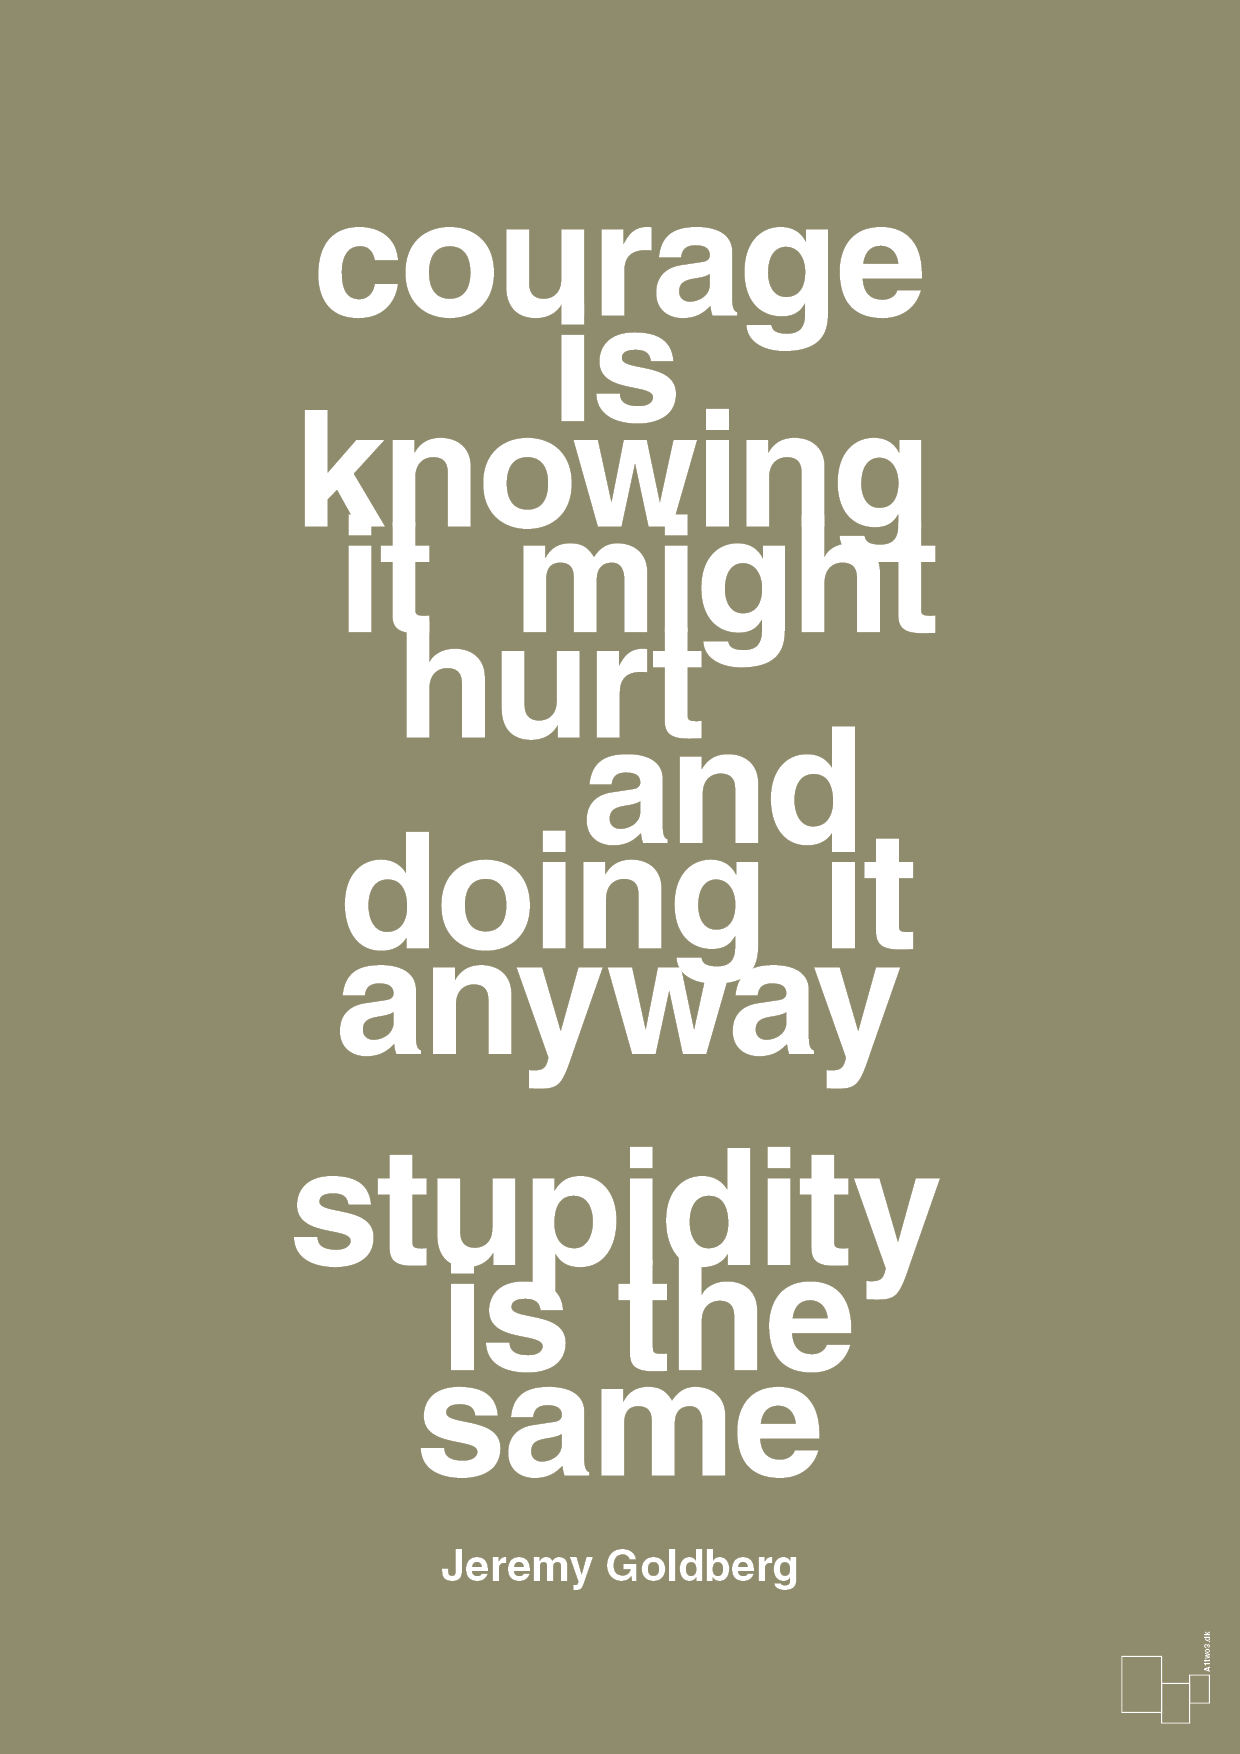 courage is knowing it might hurt and doing it anyway stupidity is the same - Plakat med Citater i Misty Forrest